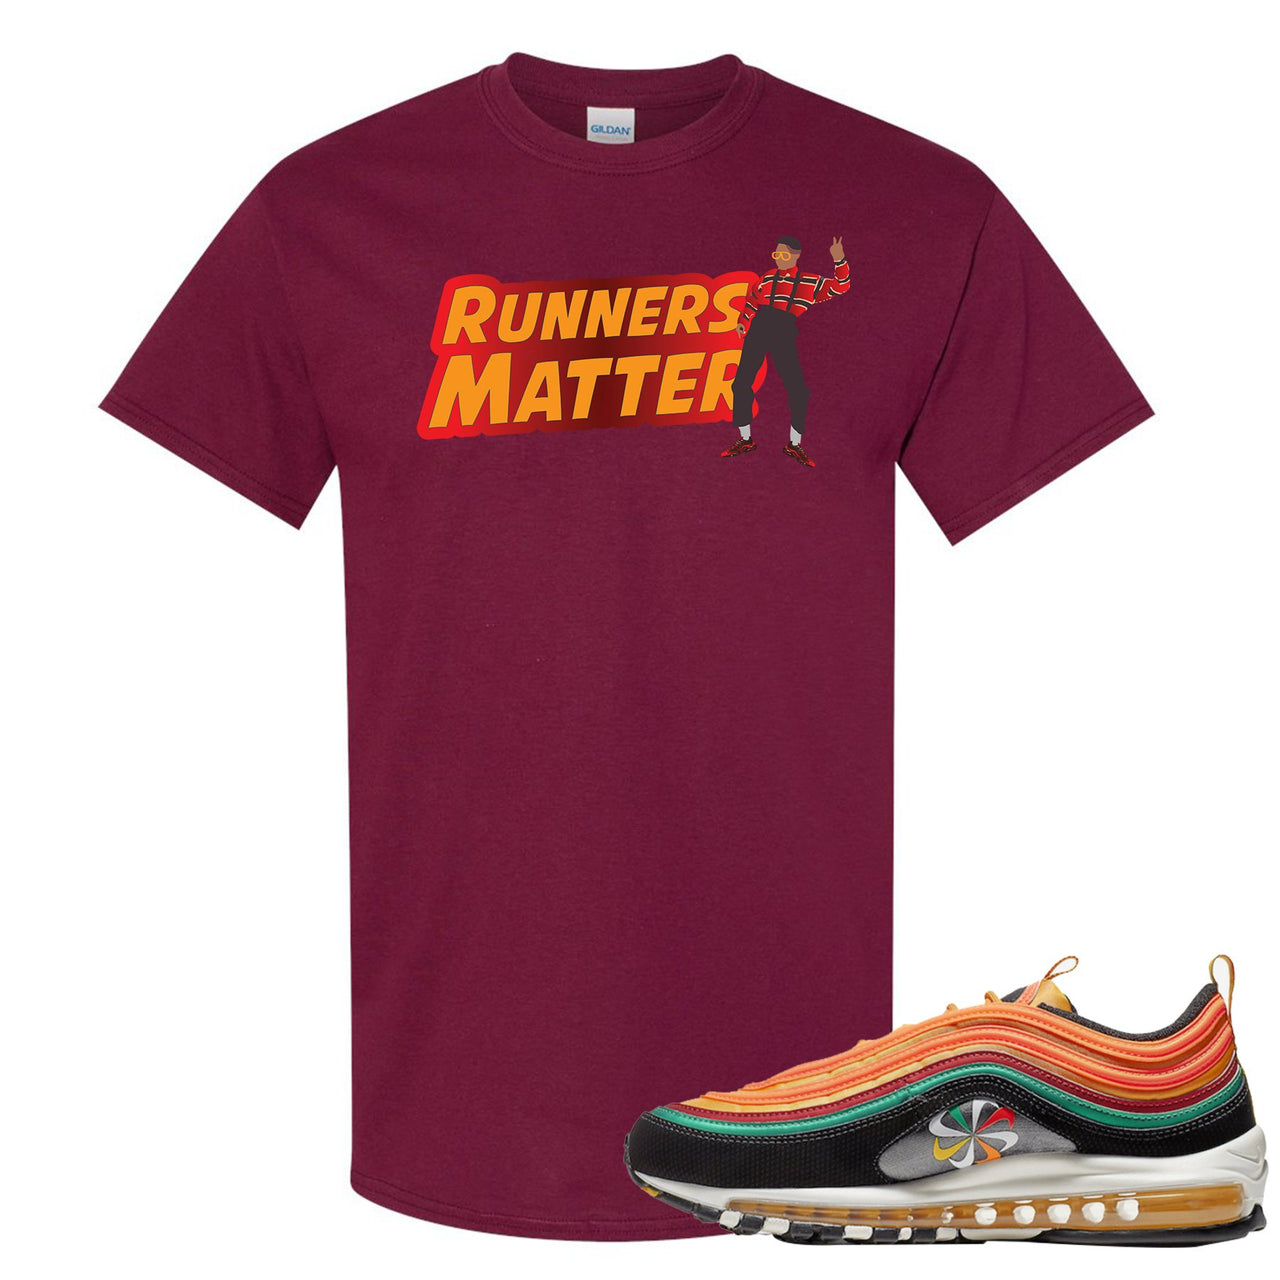 Printed on the front of the Air Max 97 Sunburst maroon sneaker matching t-shirt is the Runners Matter logo